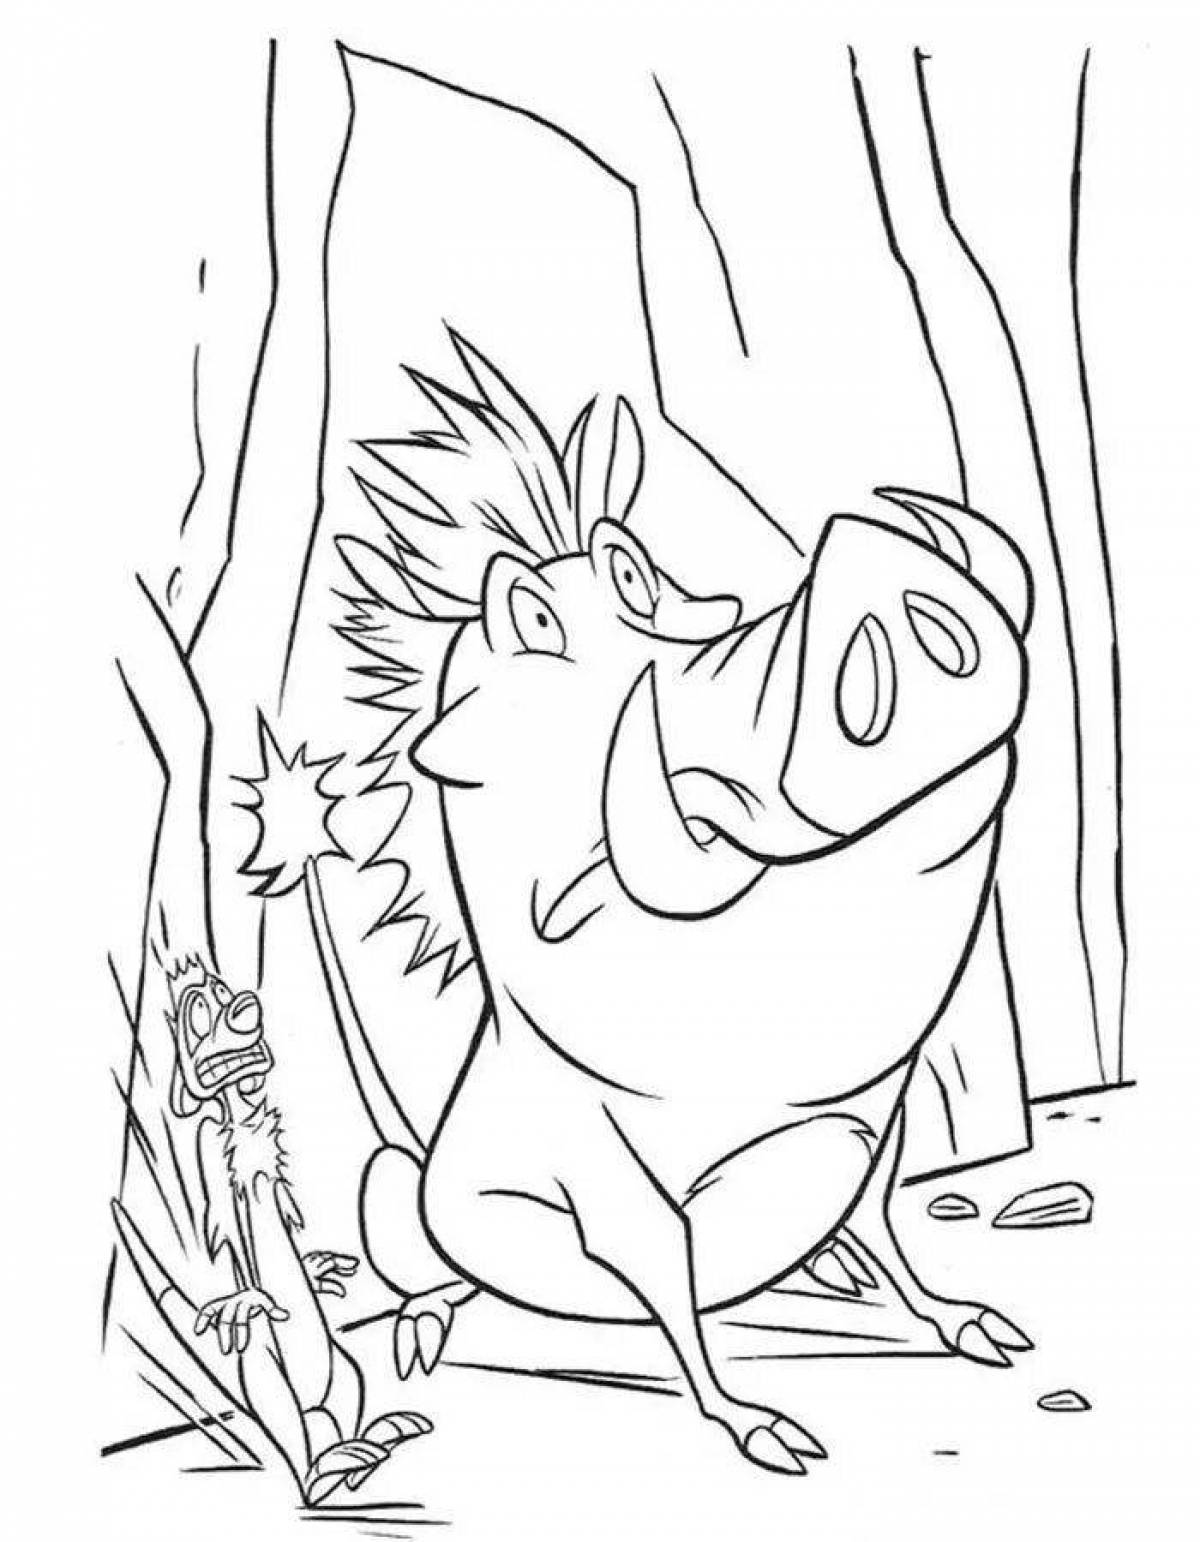 Coloring page funny pumbaa